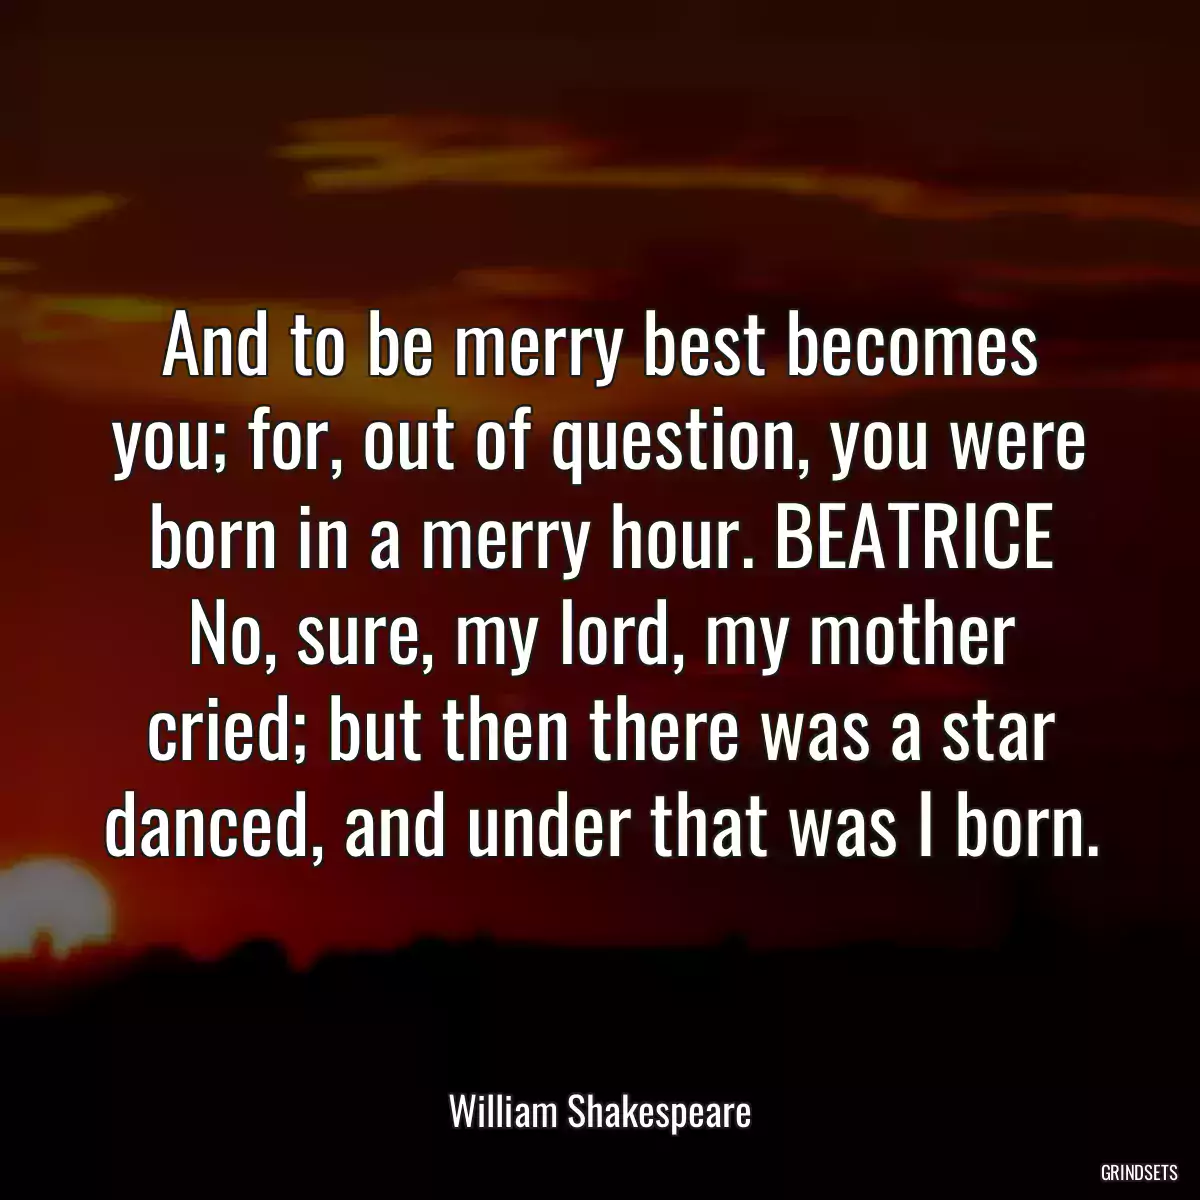 And to be merry best becomes you; for, out of question, you were born in a merry hour. BEATRICE No, sure, my lord, my mother cried; but then there was a star danced, and under that was I born.